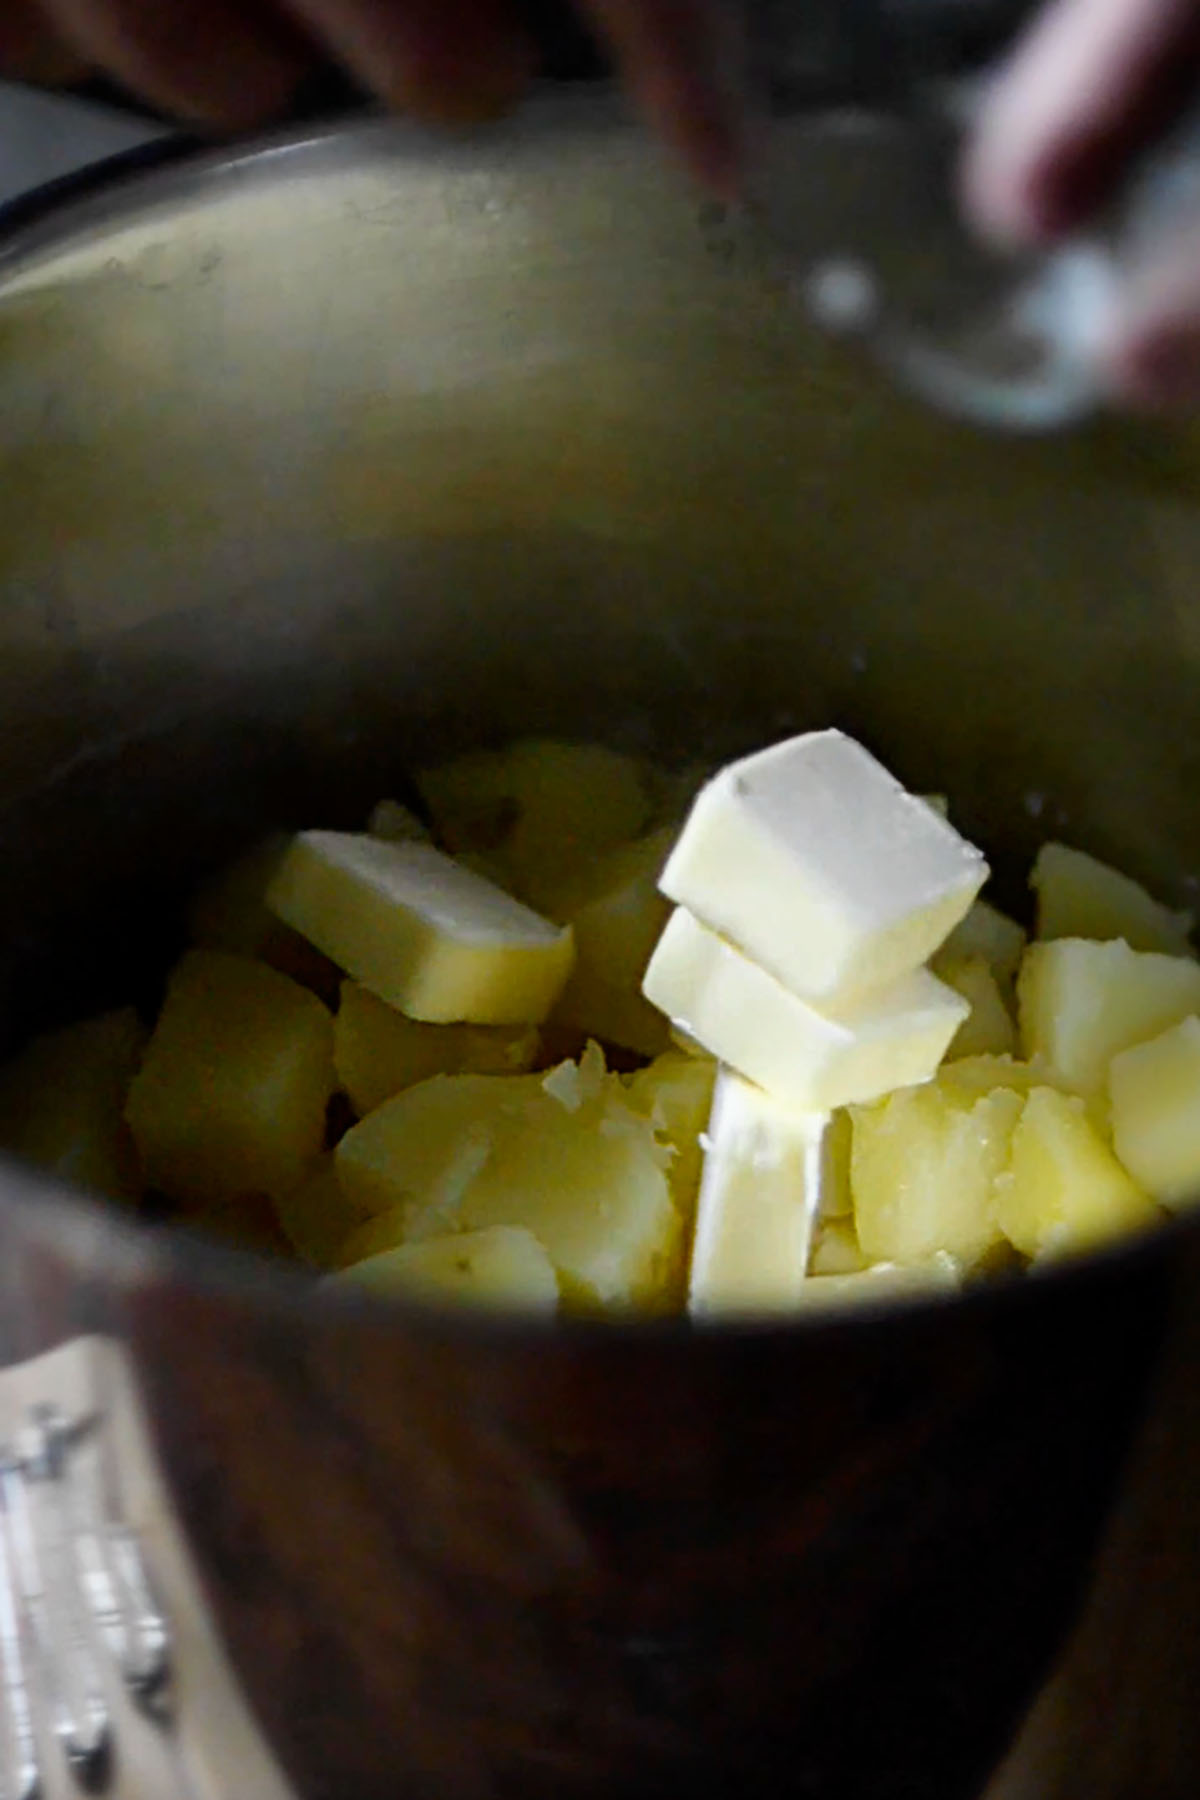 Butter added to a large pot of boiled potatoes.